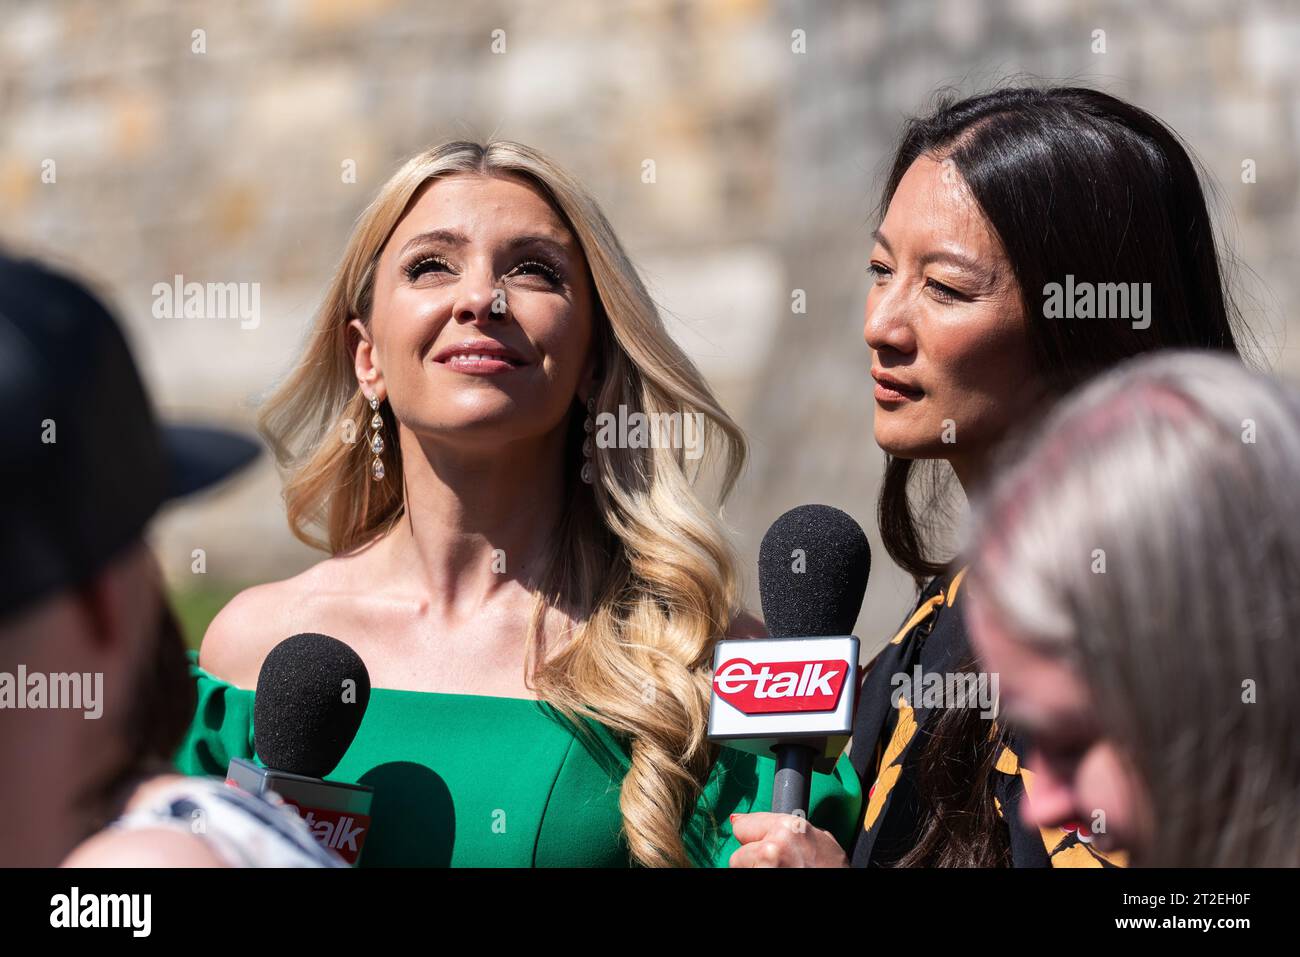 Danielle Graham & Lainey Lui reporting for etalk on CTV Television Network in Windsor, UK, covering the royal wedding of Prince Harry & Meghan Markle Stock Photo